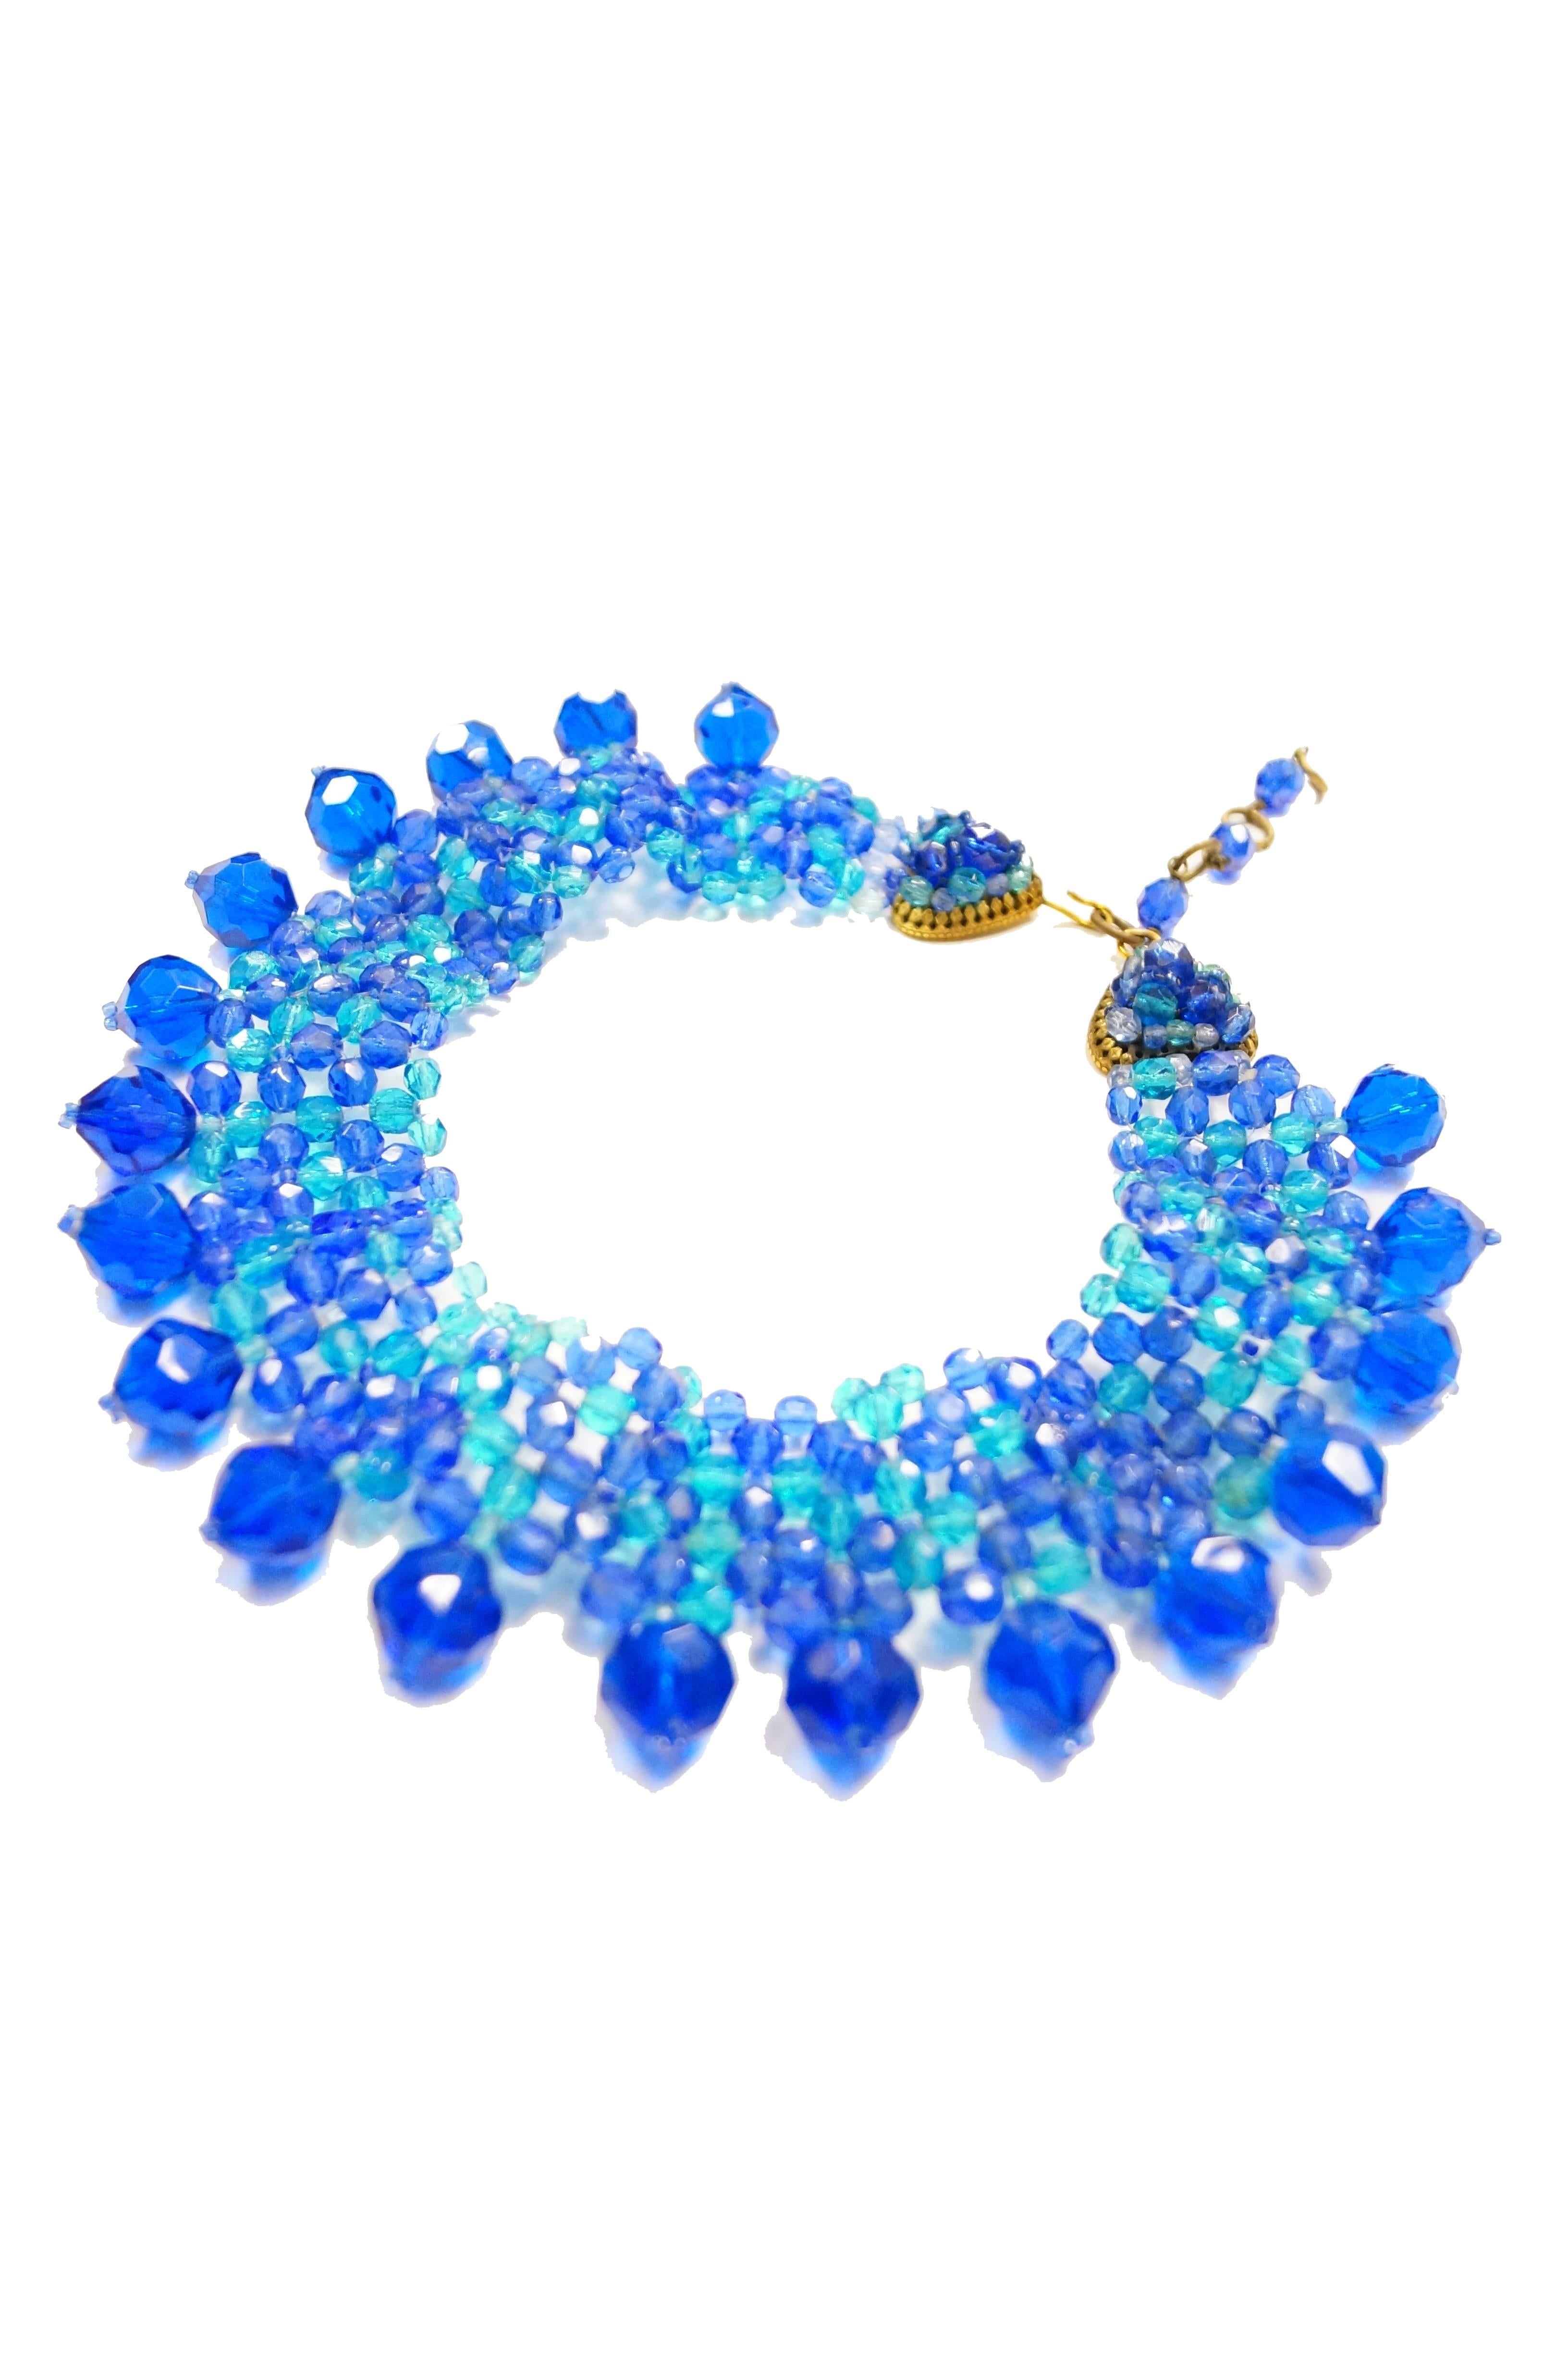 This gorgeous demi parure by Coppola e Toppo features a matching necklace and earrings. The necklace is composed of multiple rows of crystal royal blue and sky blue beads woven together into a thick collar - like choker necklace. The necklace has